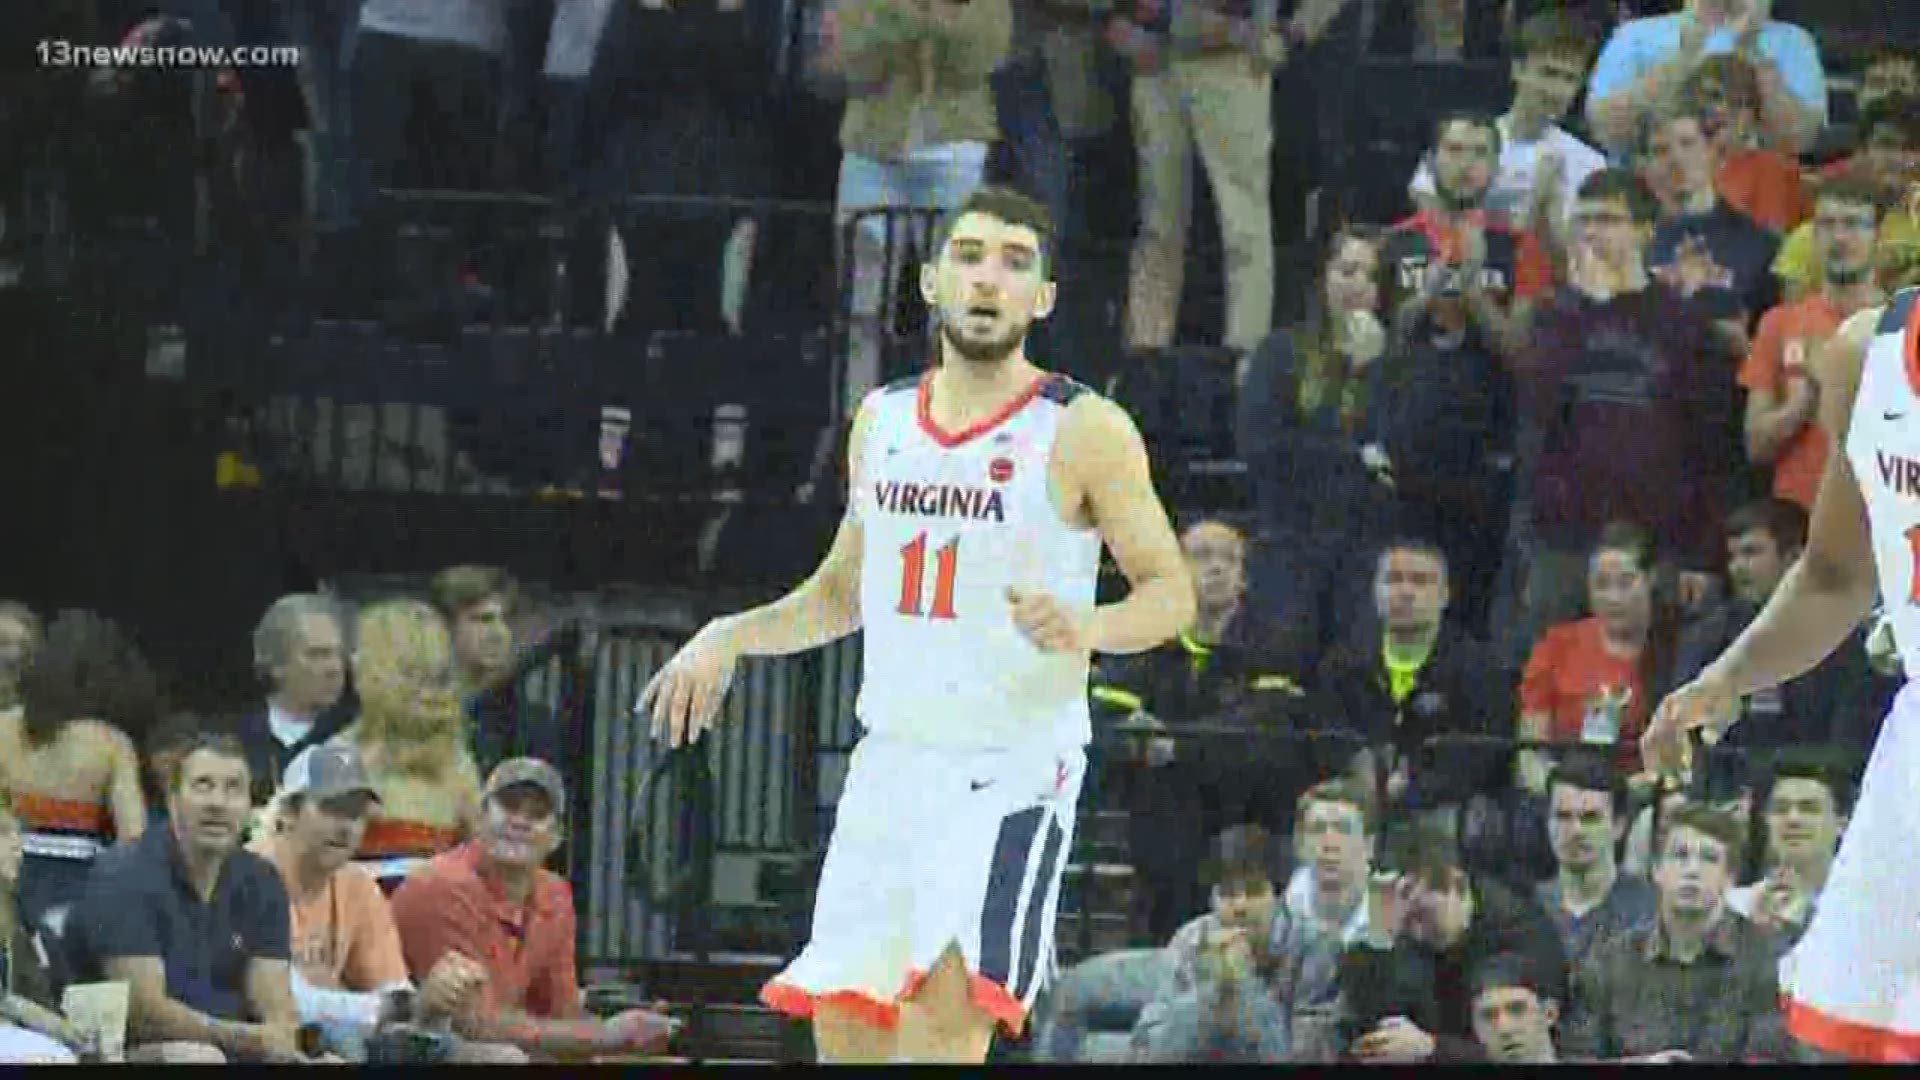 The Cavaliers got 20 points each from Kyle Guy and Ty Jerome as they won over the Colonials 76-57. UVA improves to 2-0.